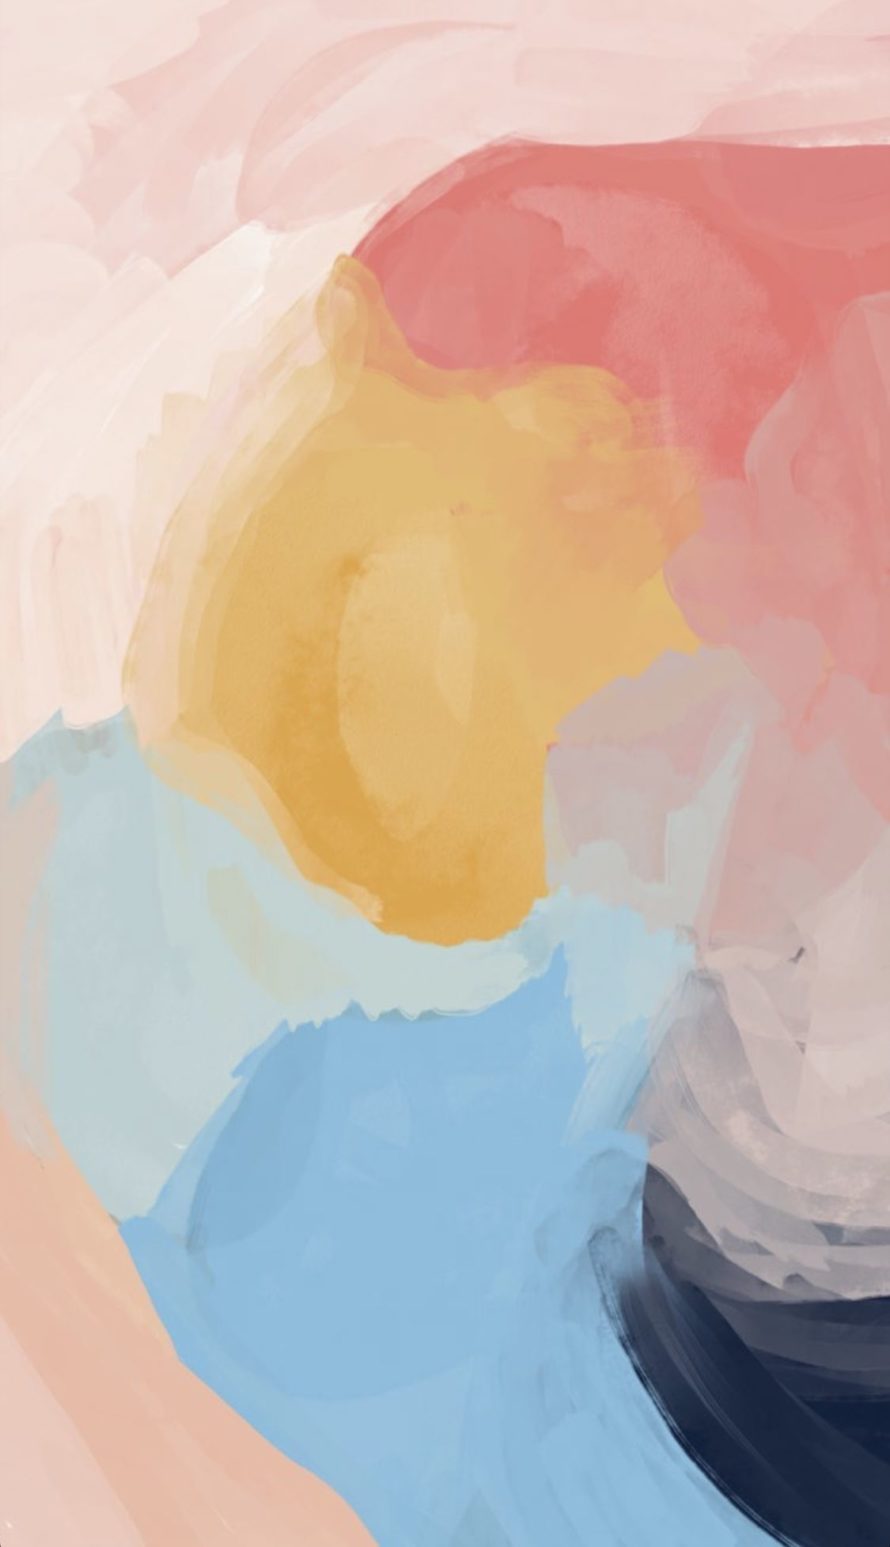 A colorful abstract painting with pink, yellow, blue, and white hues. - Colorful, abstract